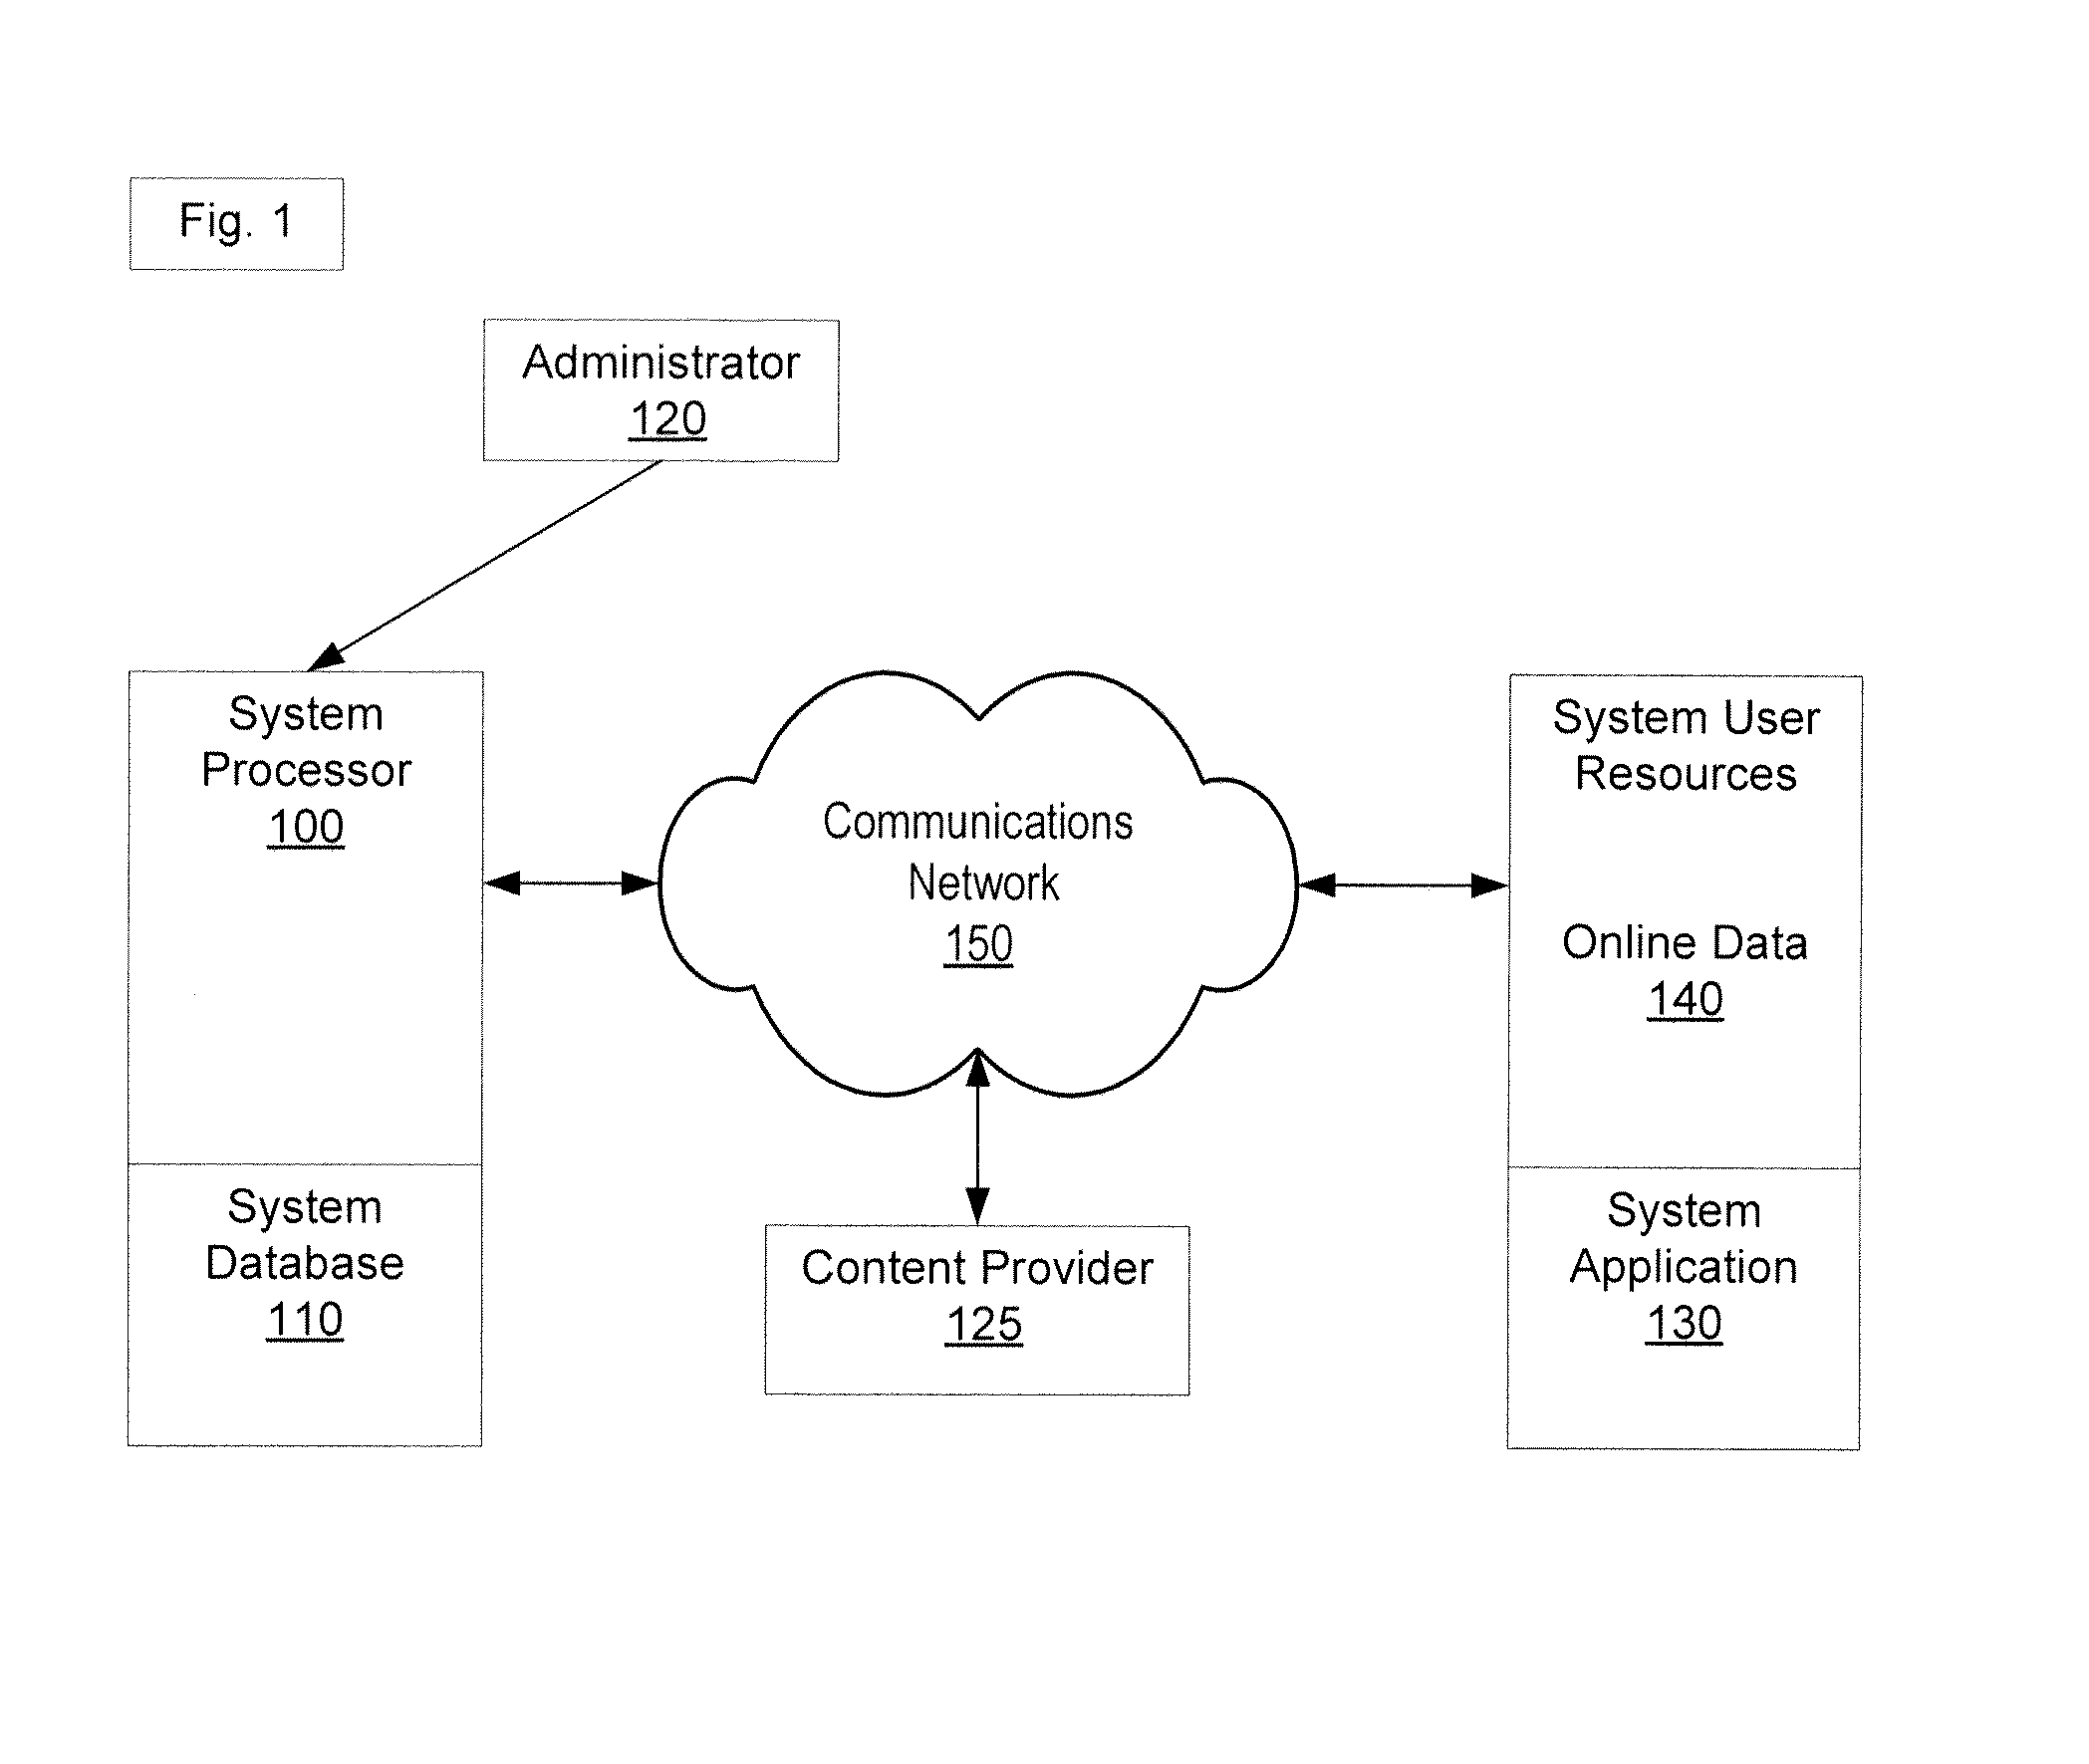 Apparatuses, Methods and Systems For Automated Online Data Submission